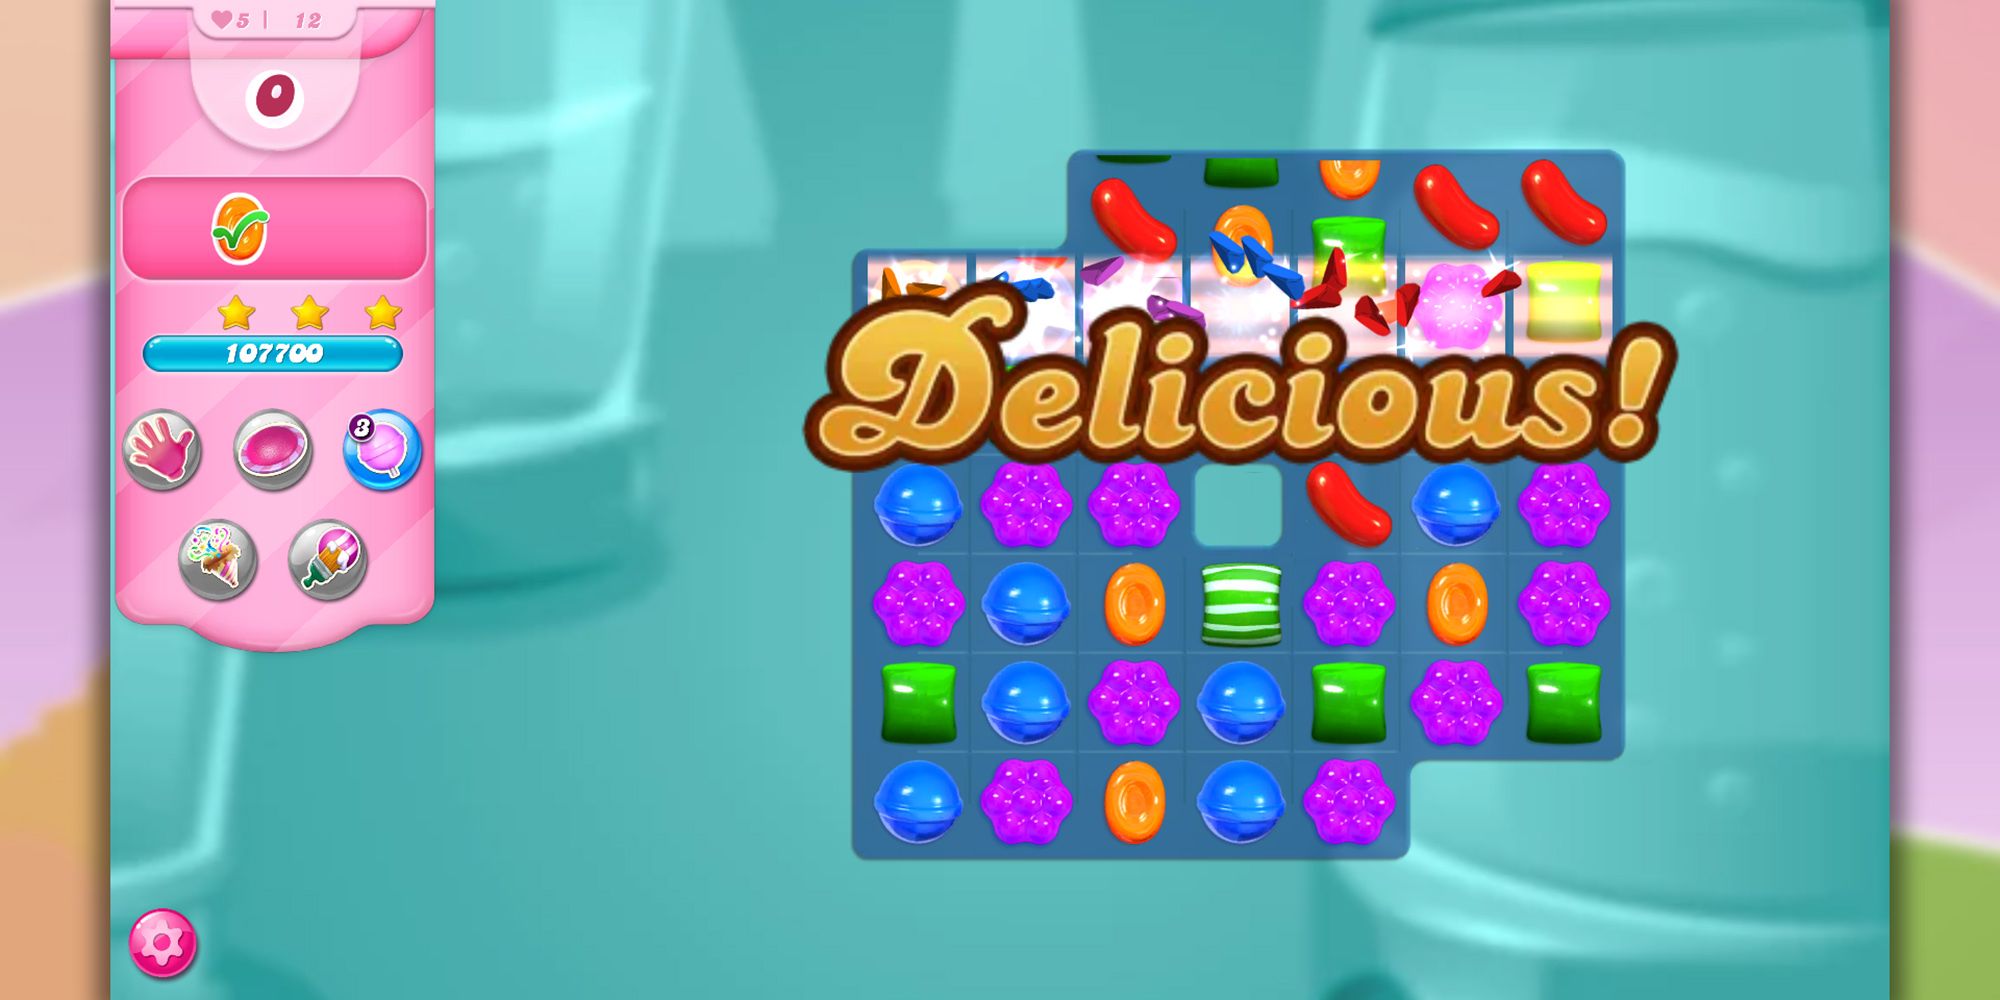 A deep-voiced narrator praises a high combo with the word, "Delicious!", after a successful round of Candy Crush Saga.